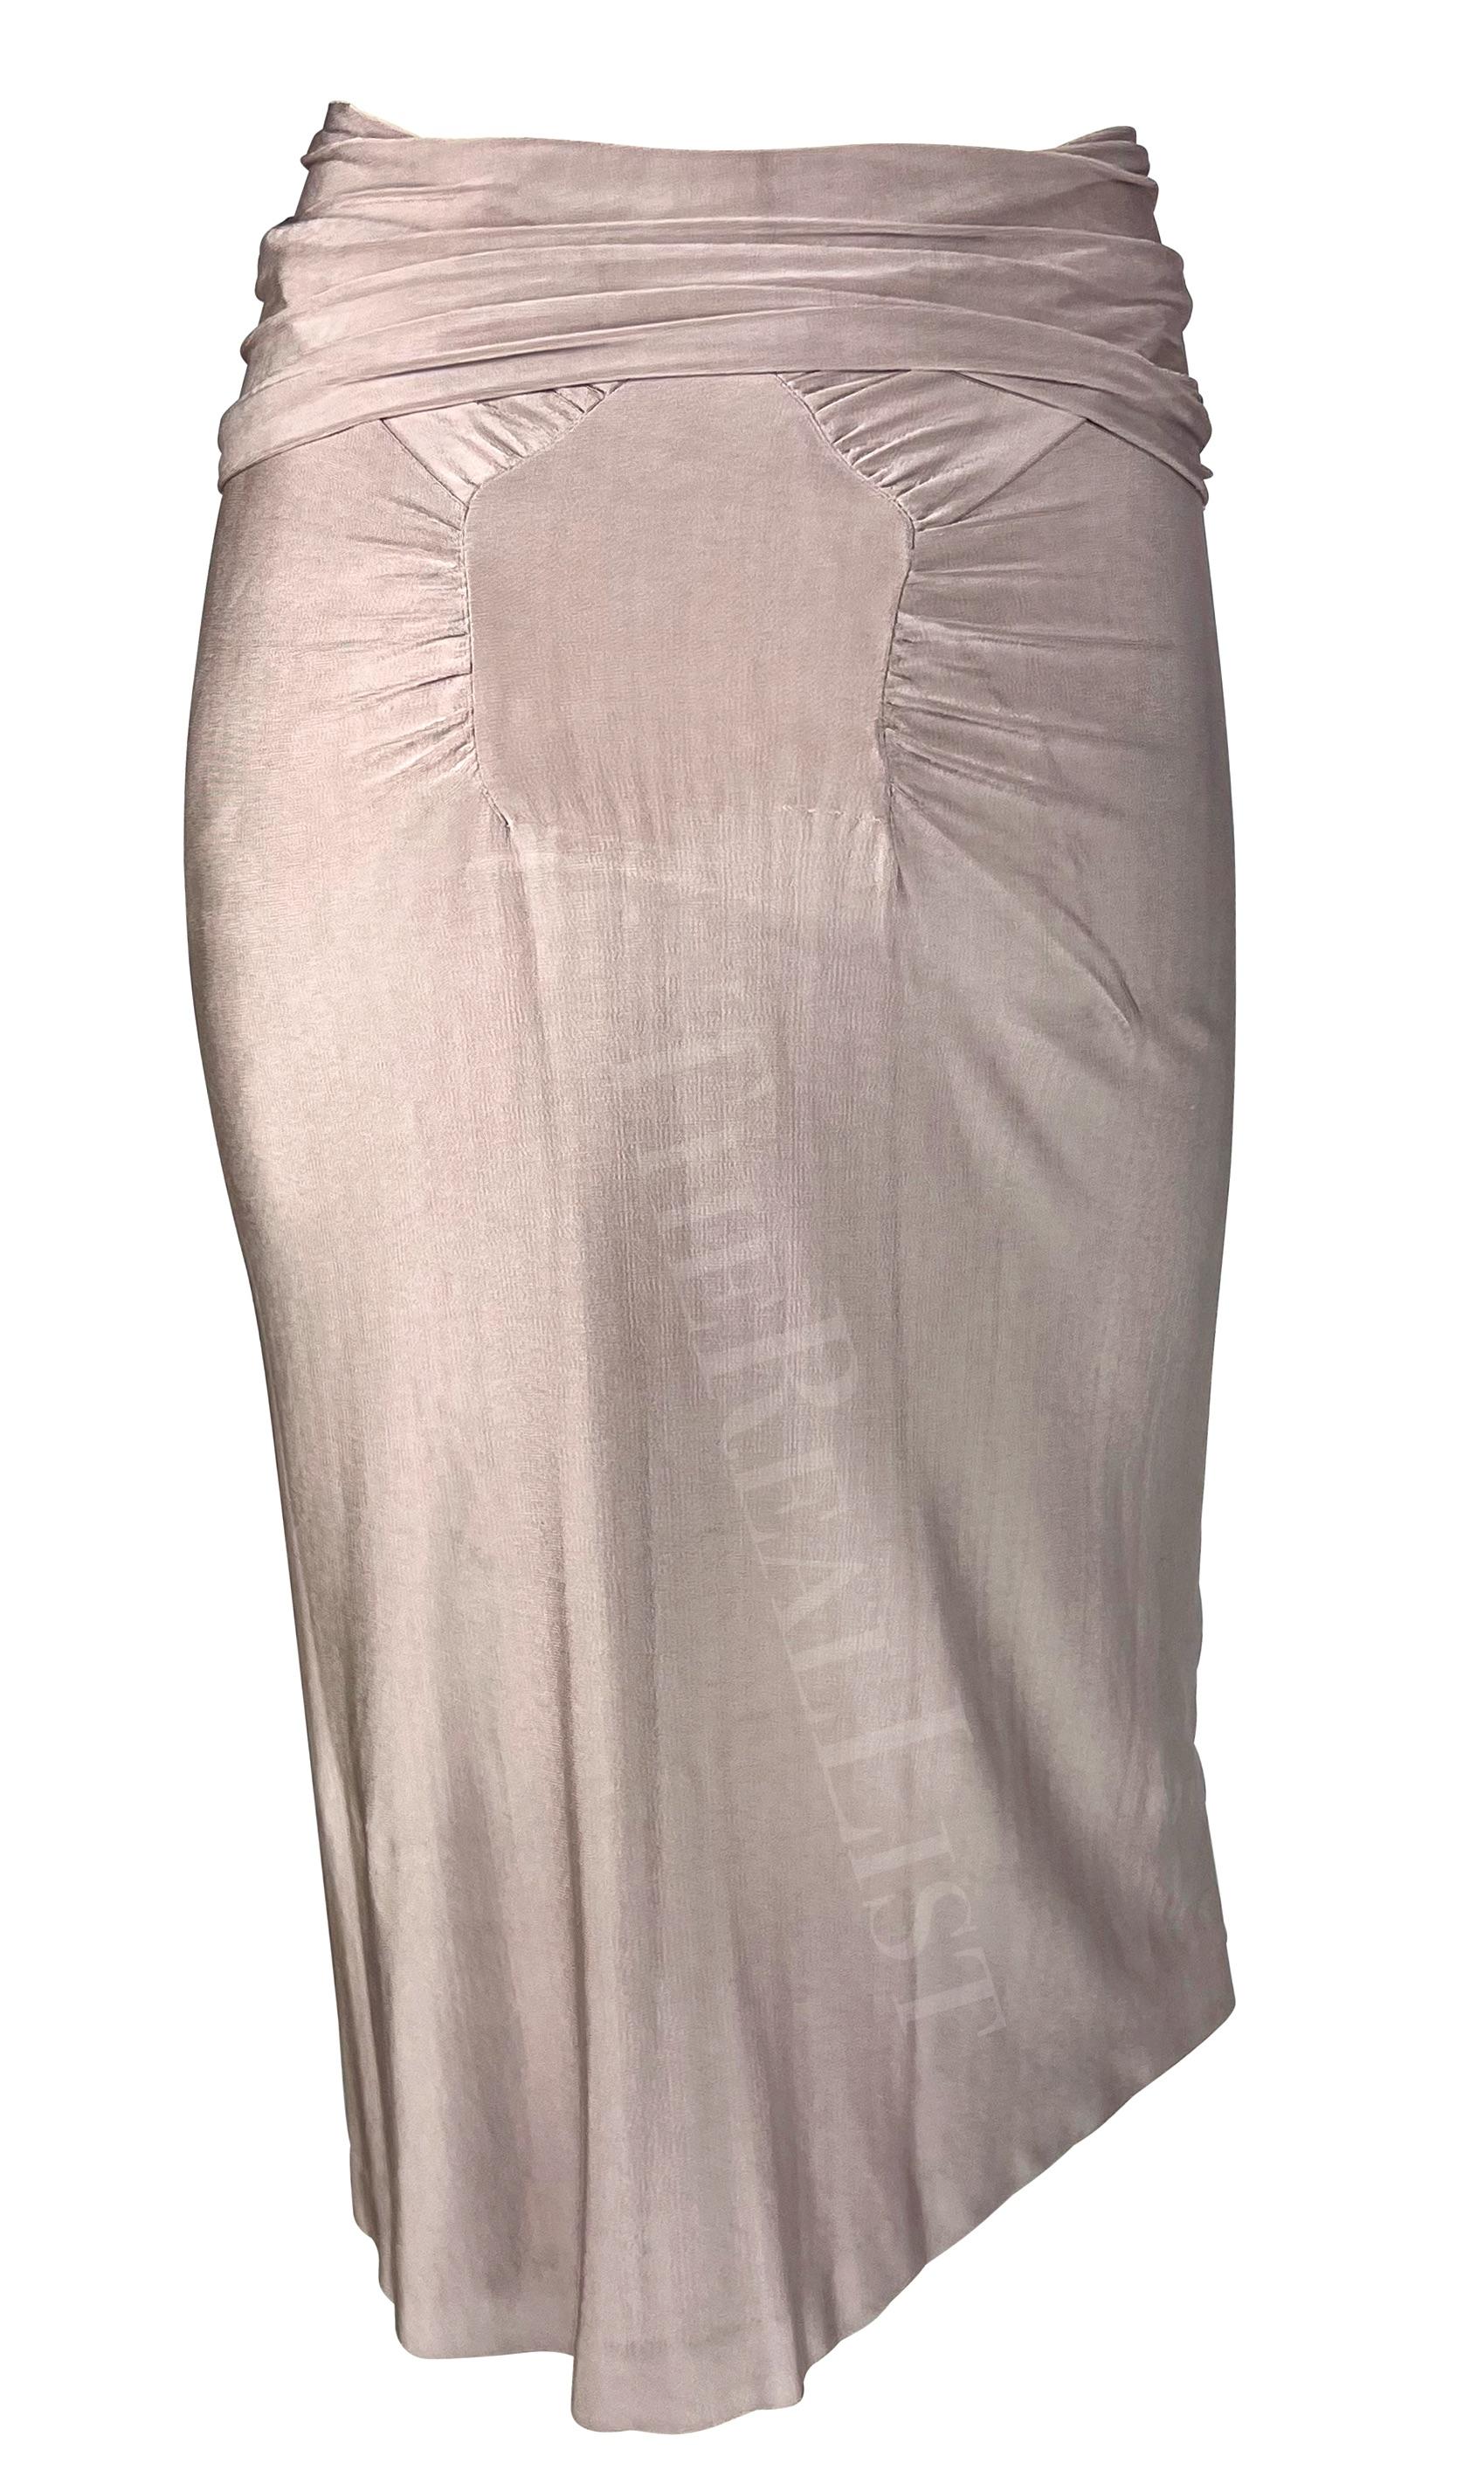 S/S 2003 Yves Saint Laurent by Tom Ford Runway Dusty Lavender Ruched Slinky 2